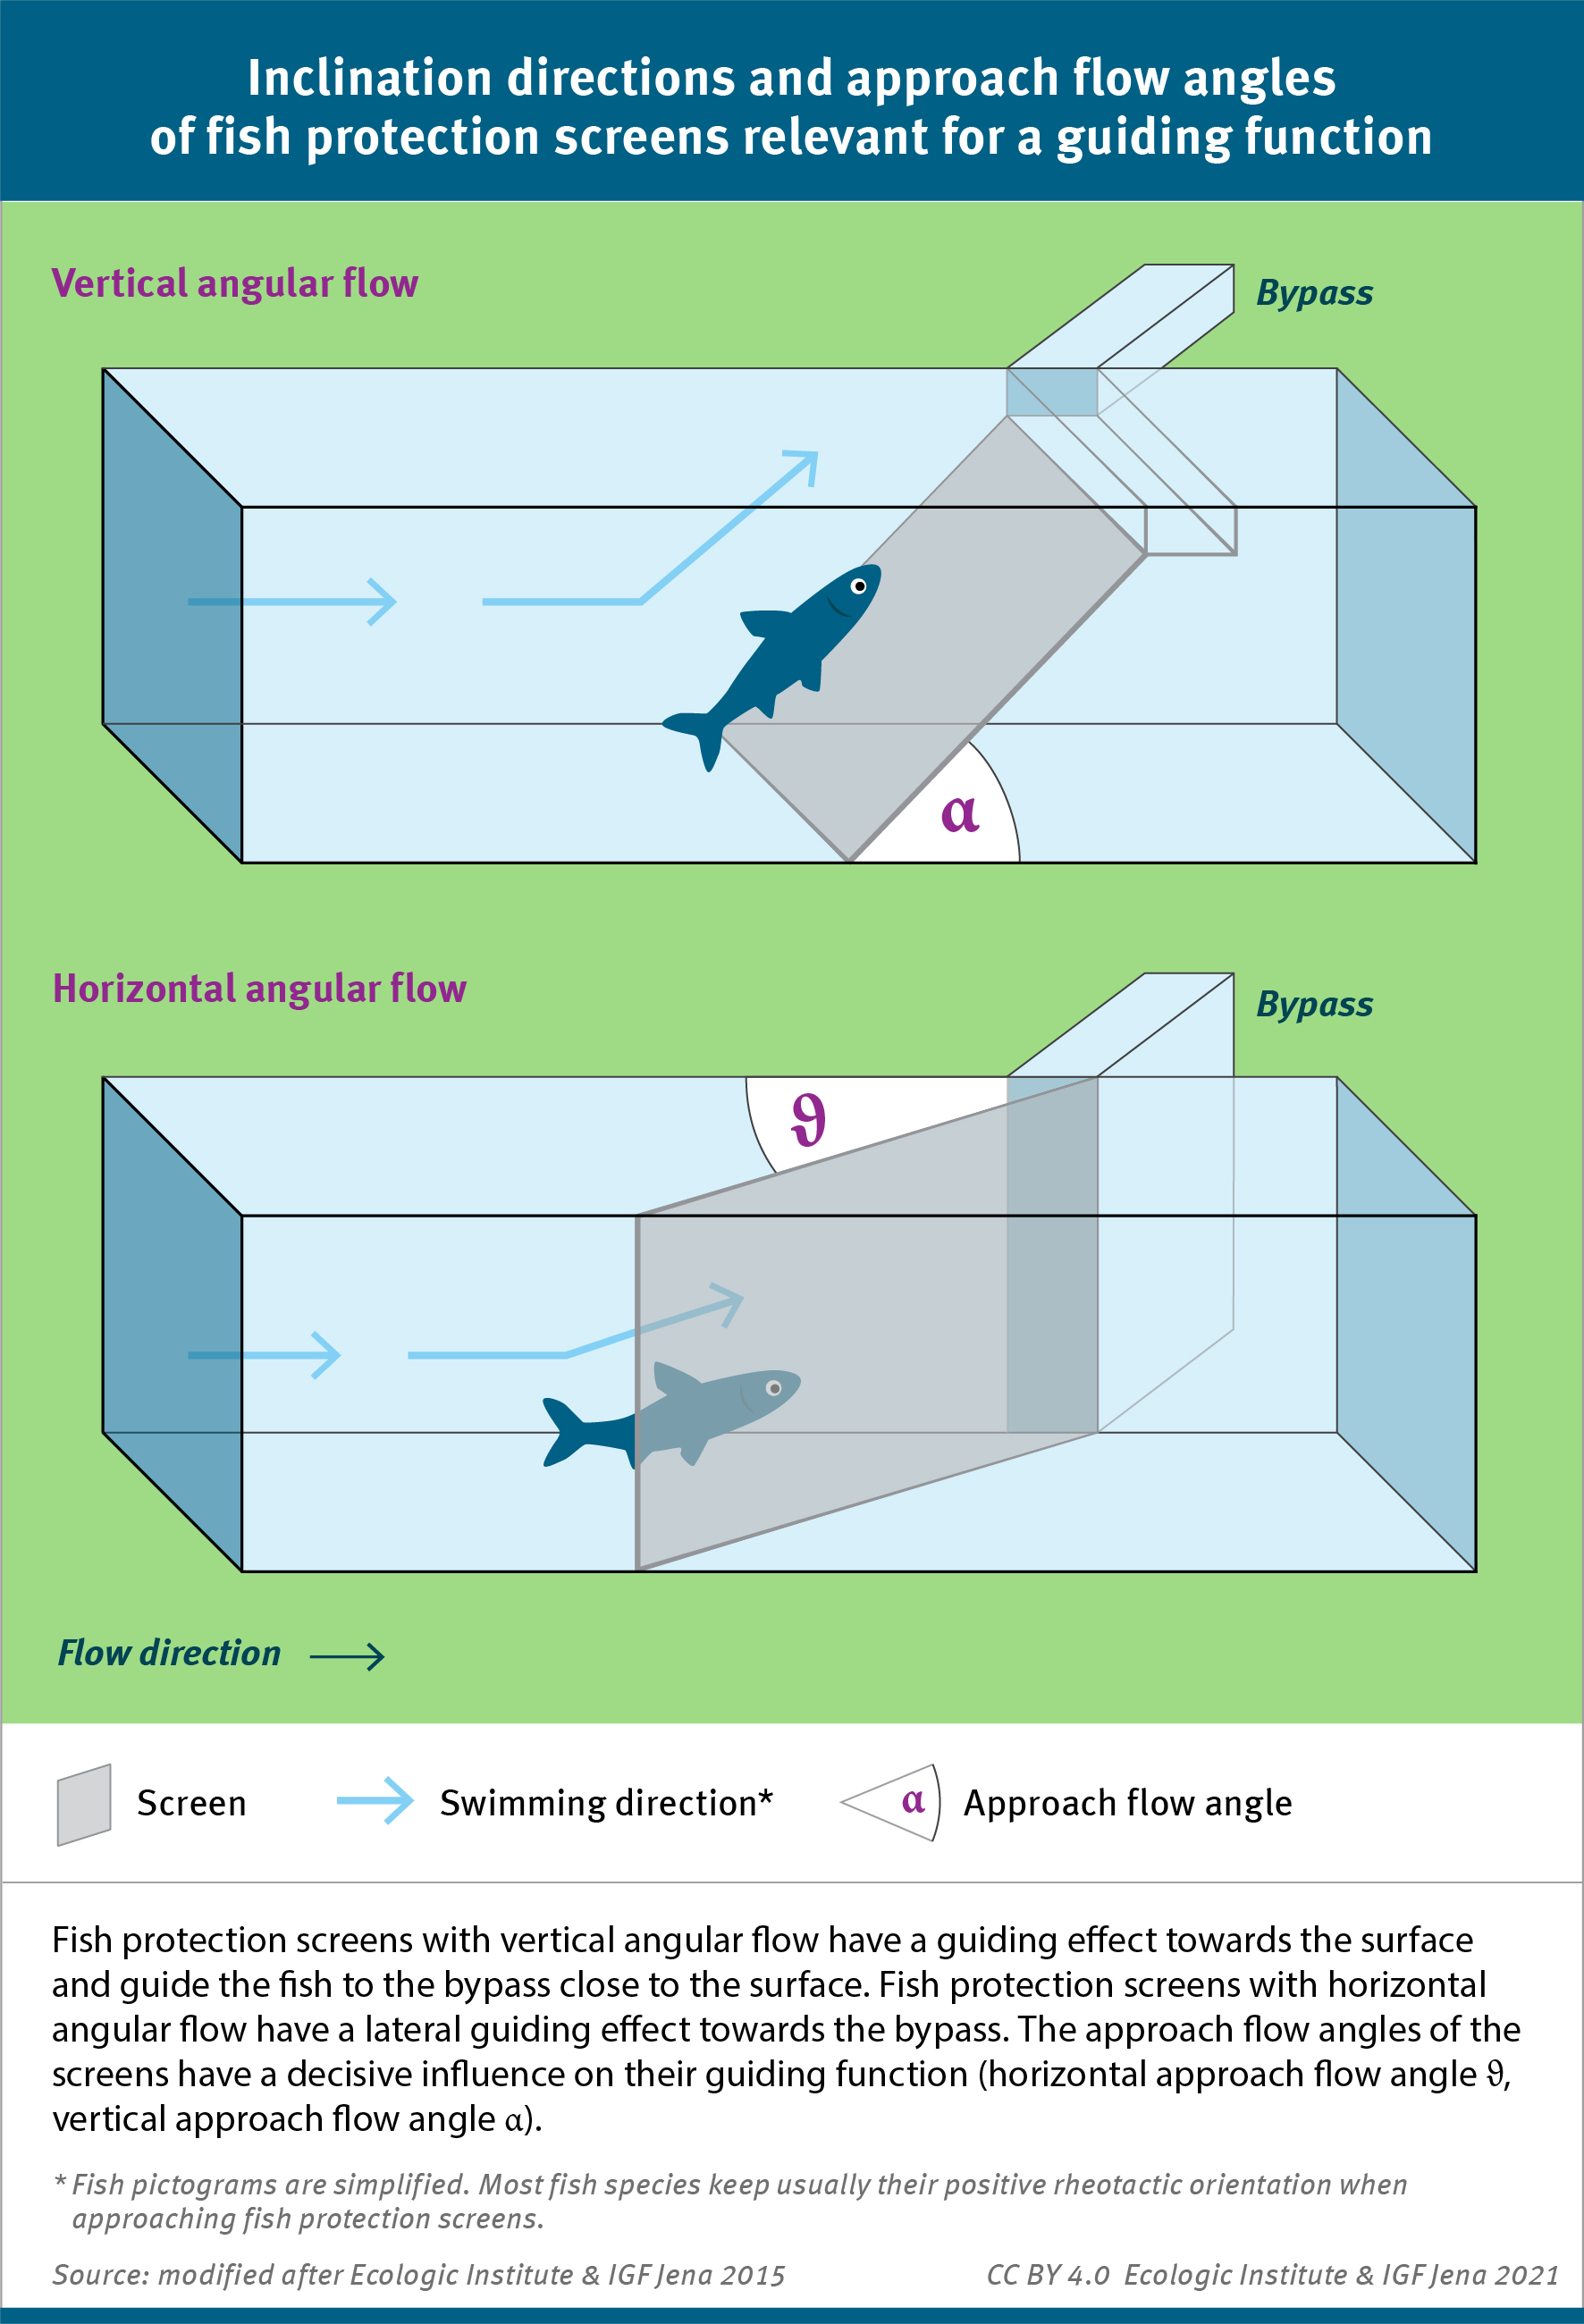 The infographic shows the difference between horizontally angled and vertically angled fish protection screens.